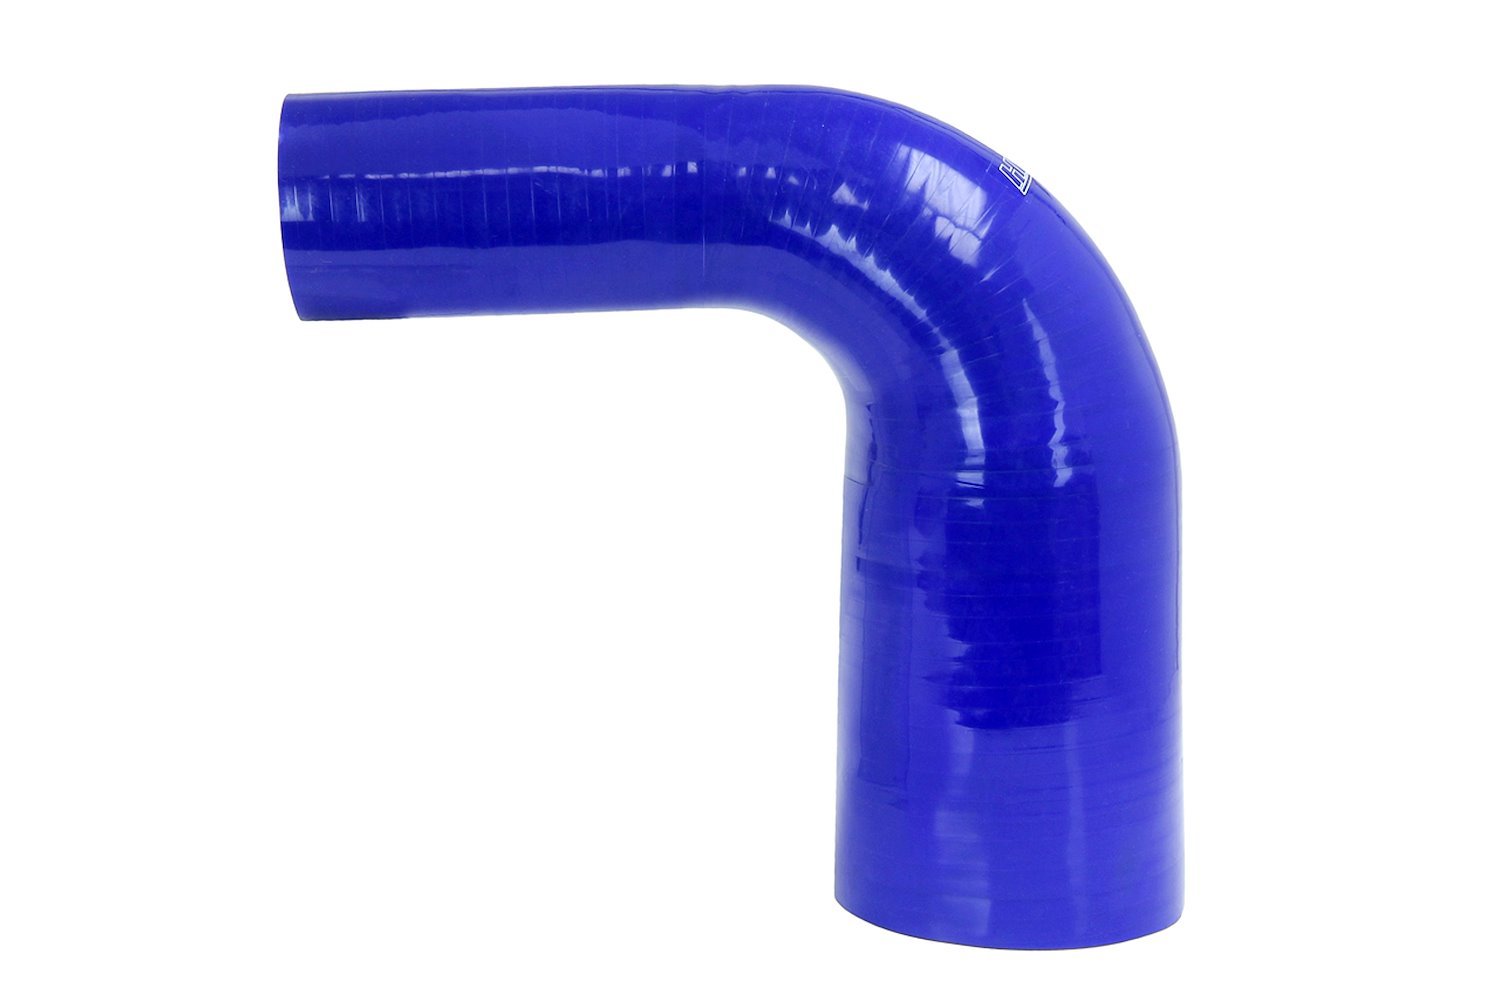 HTSER90-275-312-BLUE Silicone 90-Degree Elbow Hose, High-Temp 4-Ply Reinforced, 2-3/4 in. - 3-1/8 in. ID, Blue